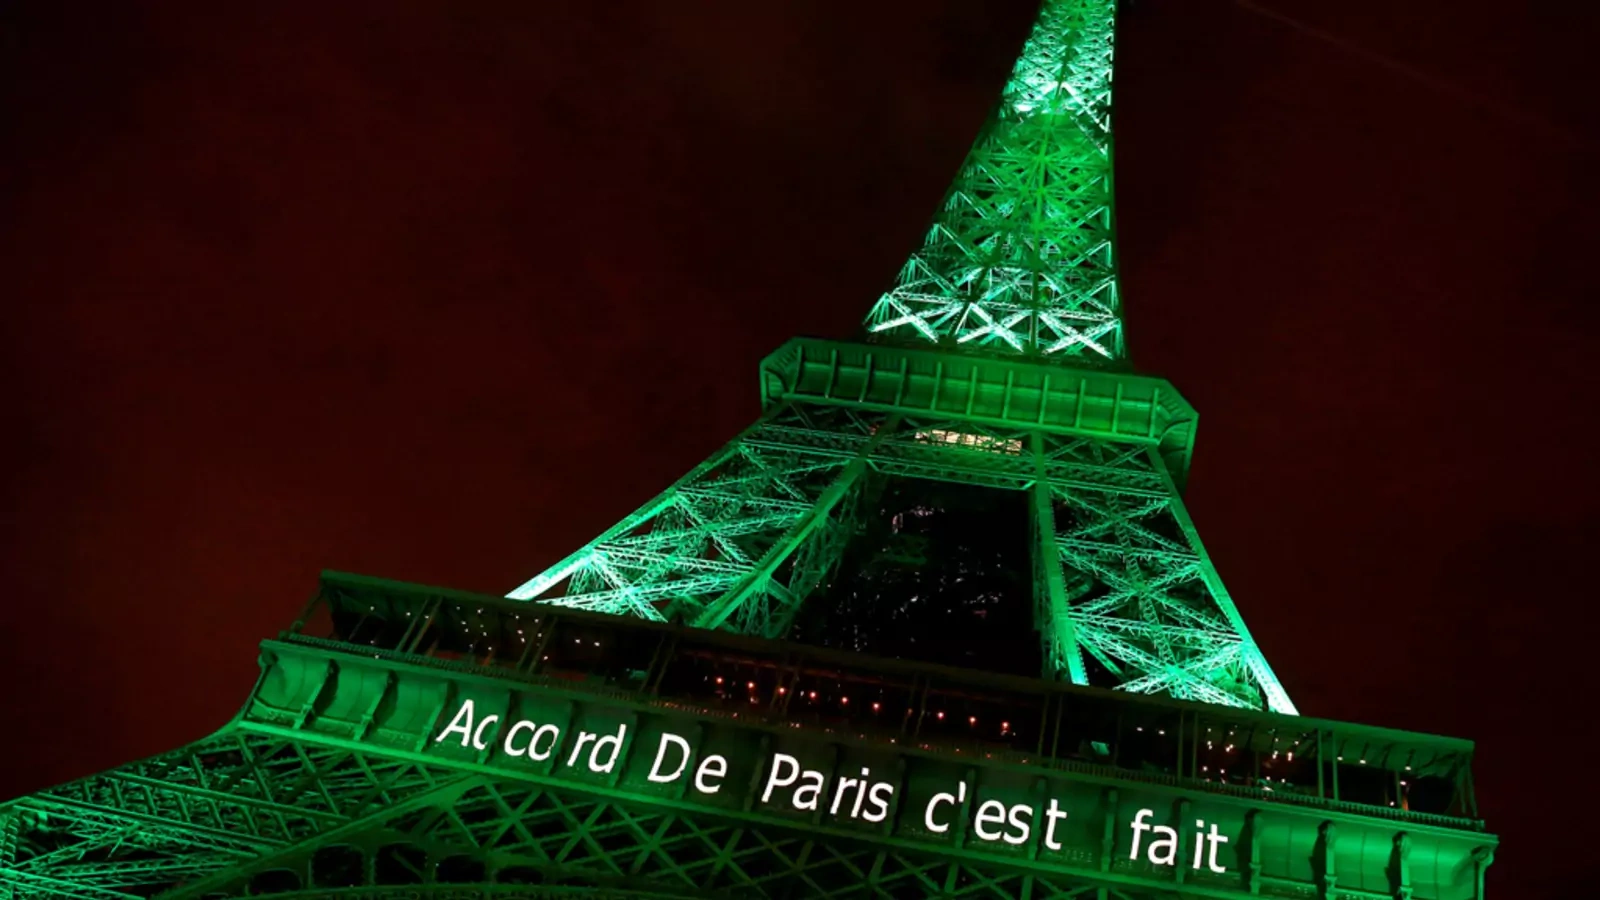 The Eiffel tower is illuminated in celebration of the Paris Agreement's entry into force in November 2016.